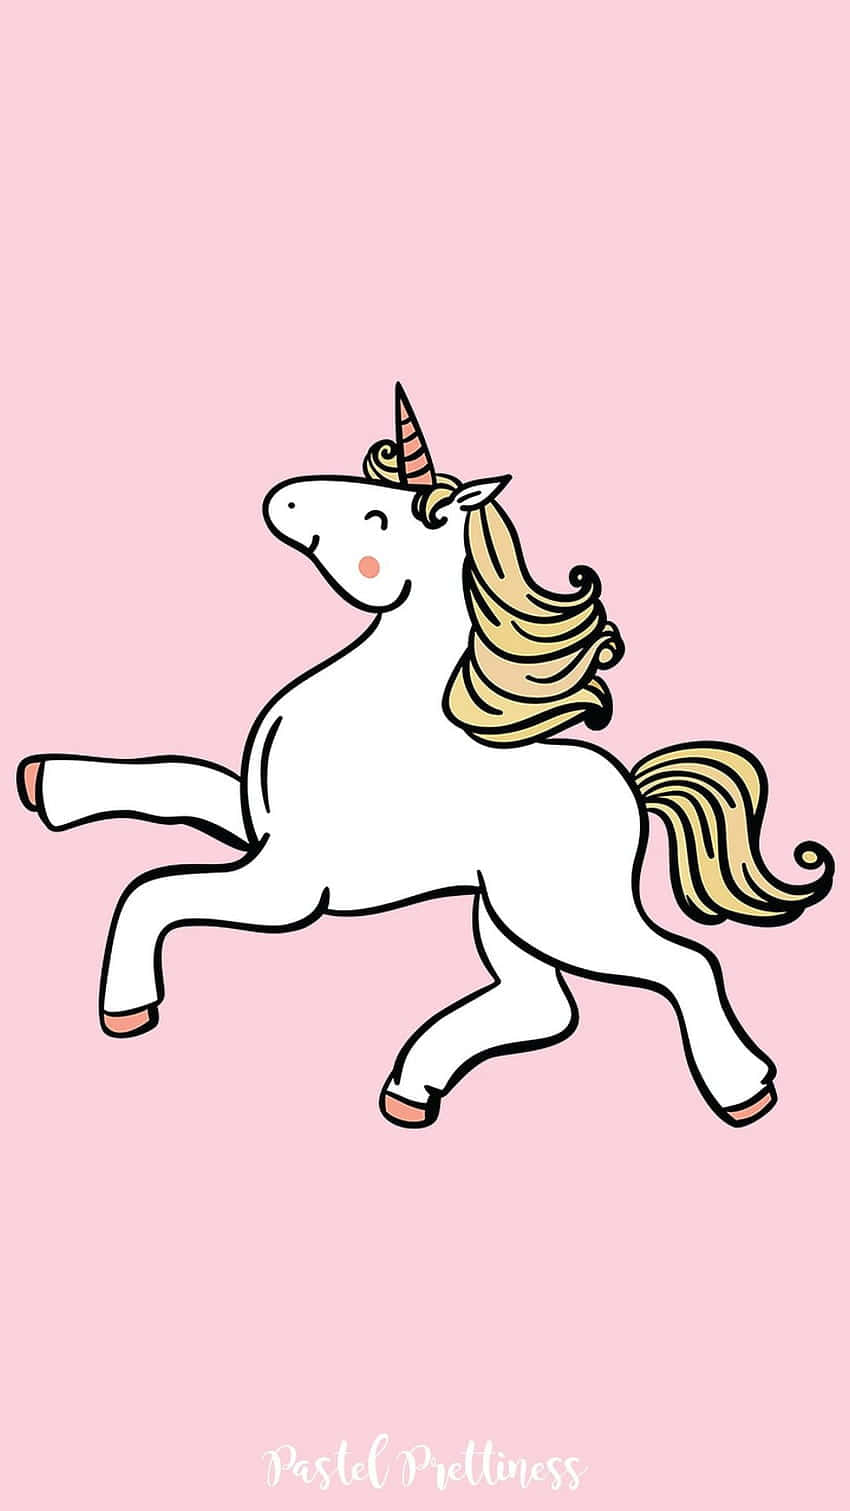 Join the magical world with Pastel Unicorn Wallpaper